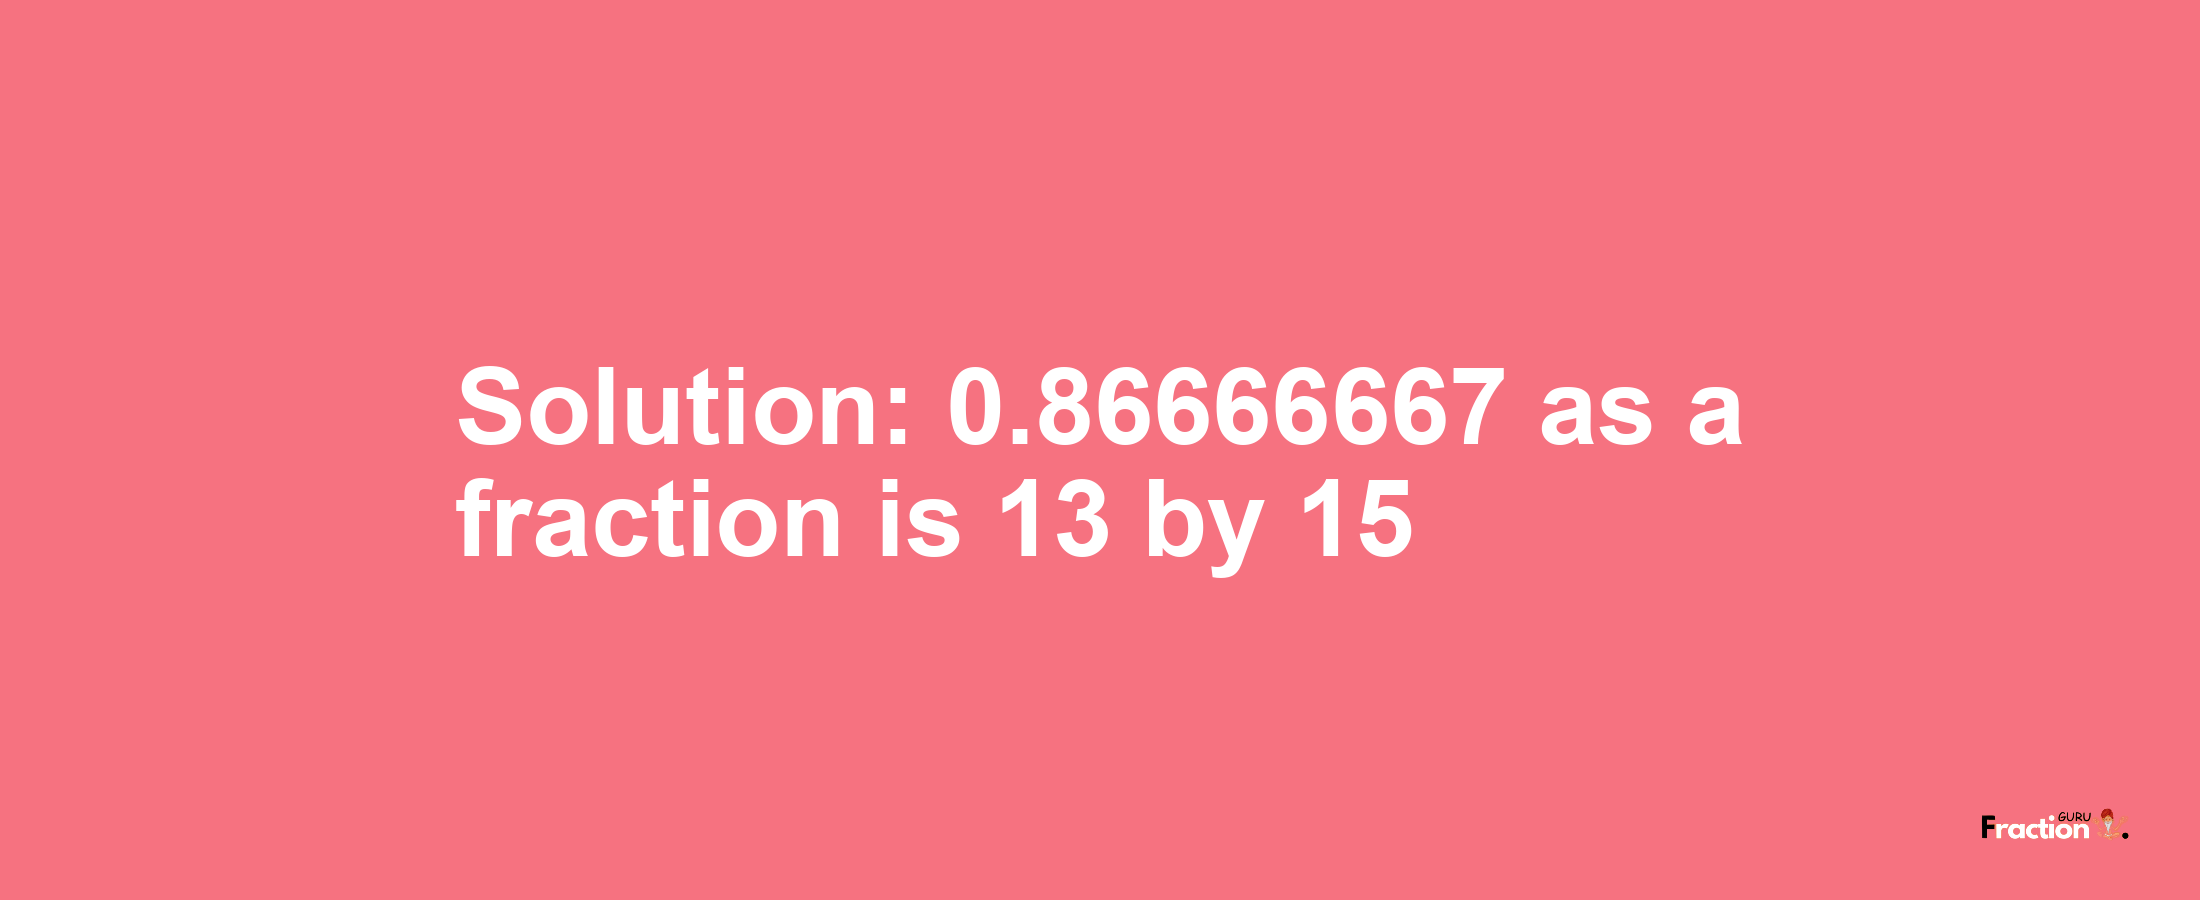 Solution:0.86666667 as a fraction is 13/15